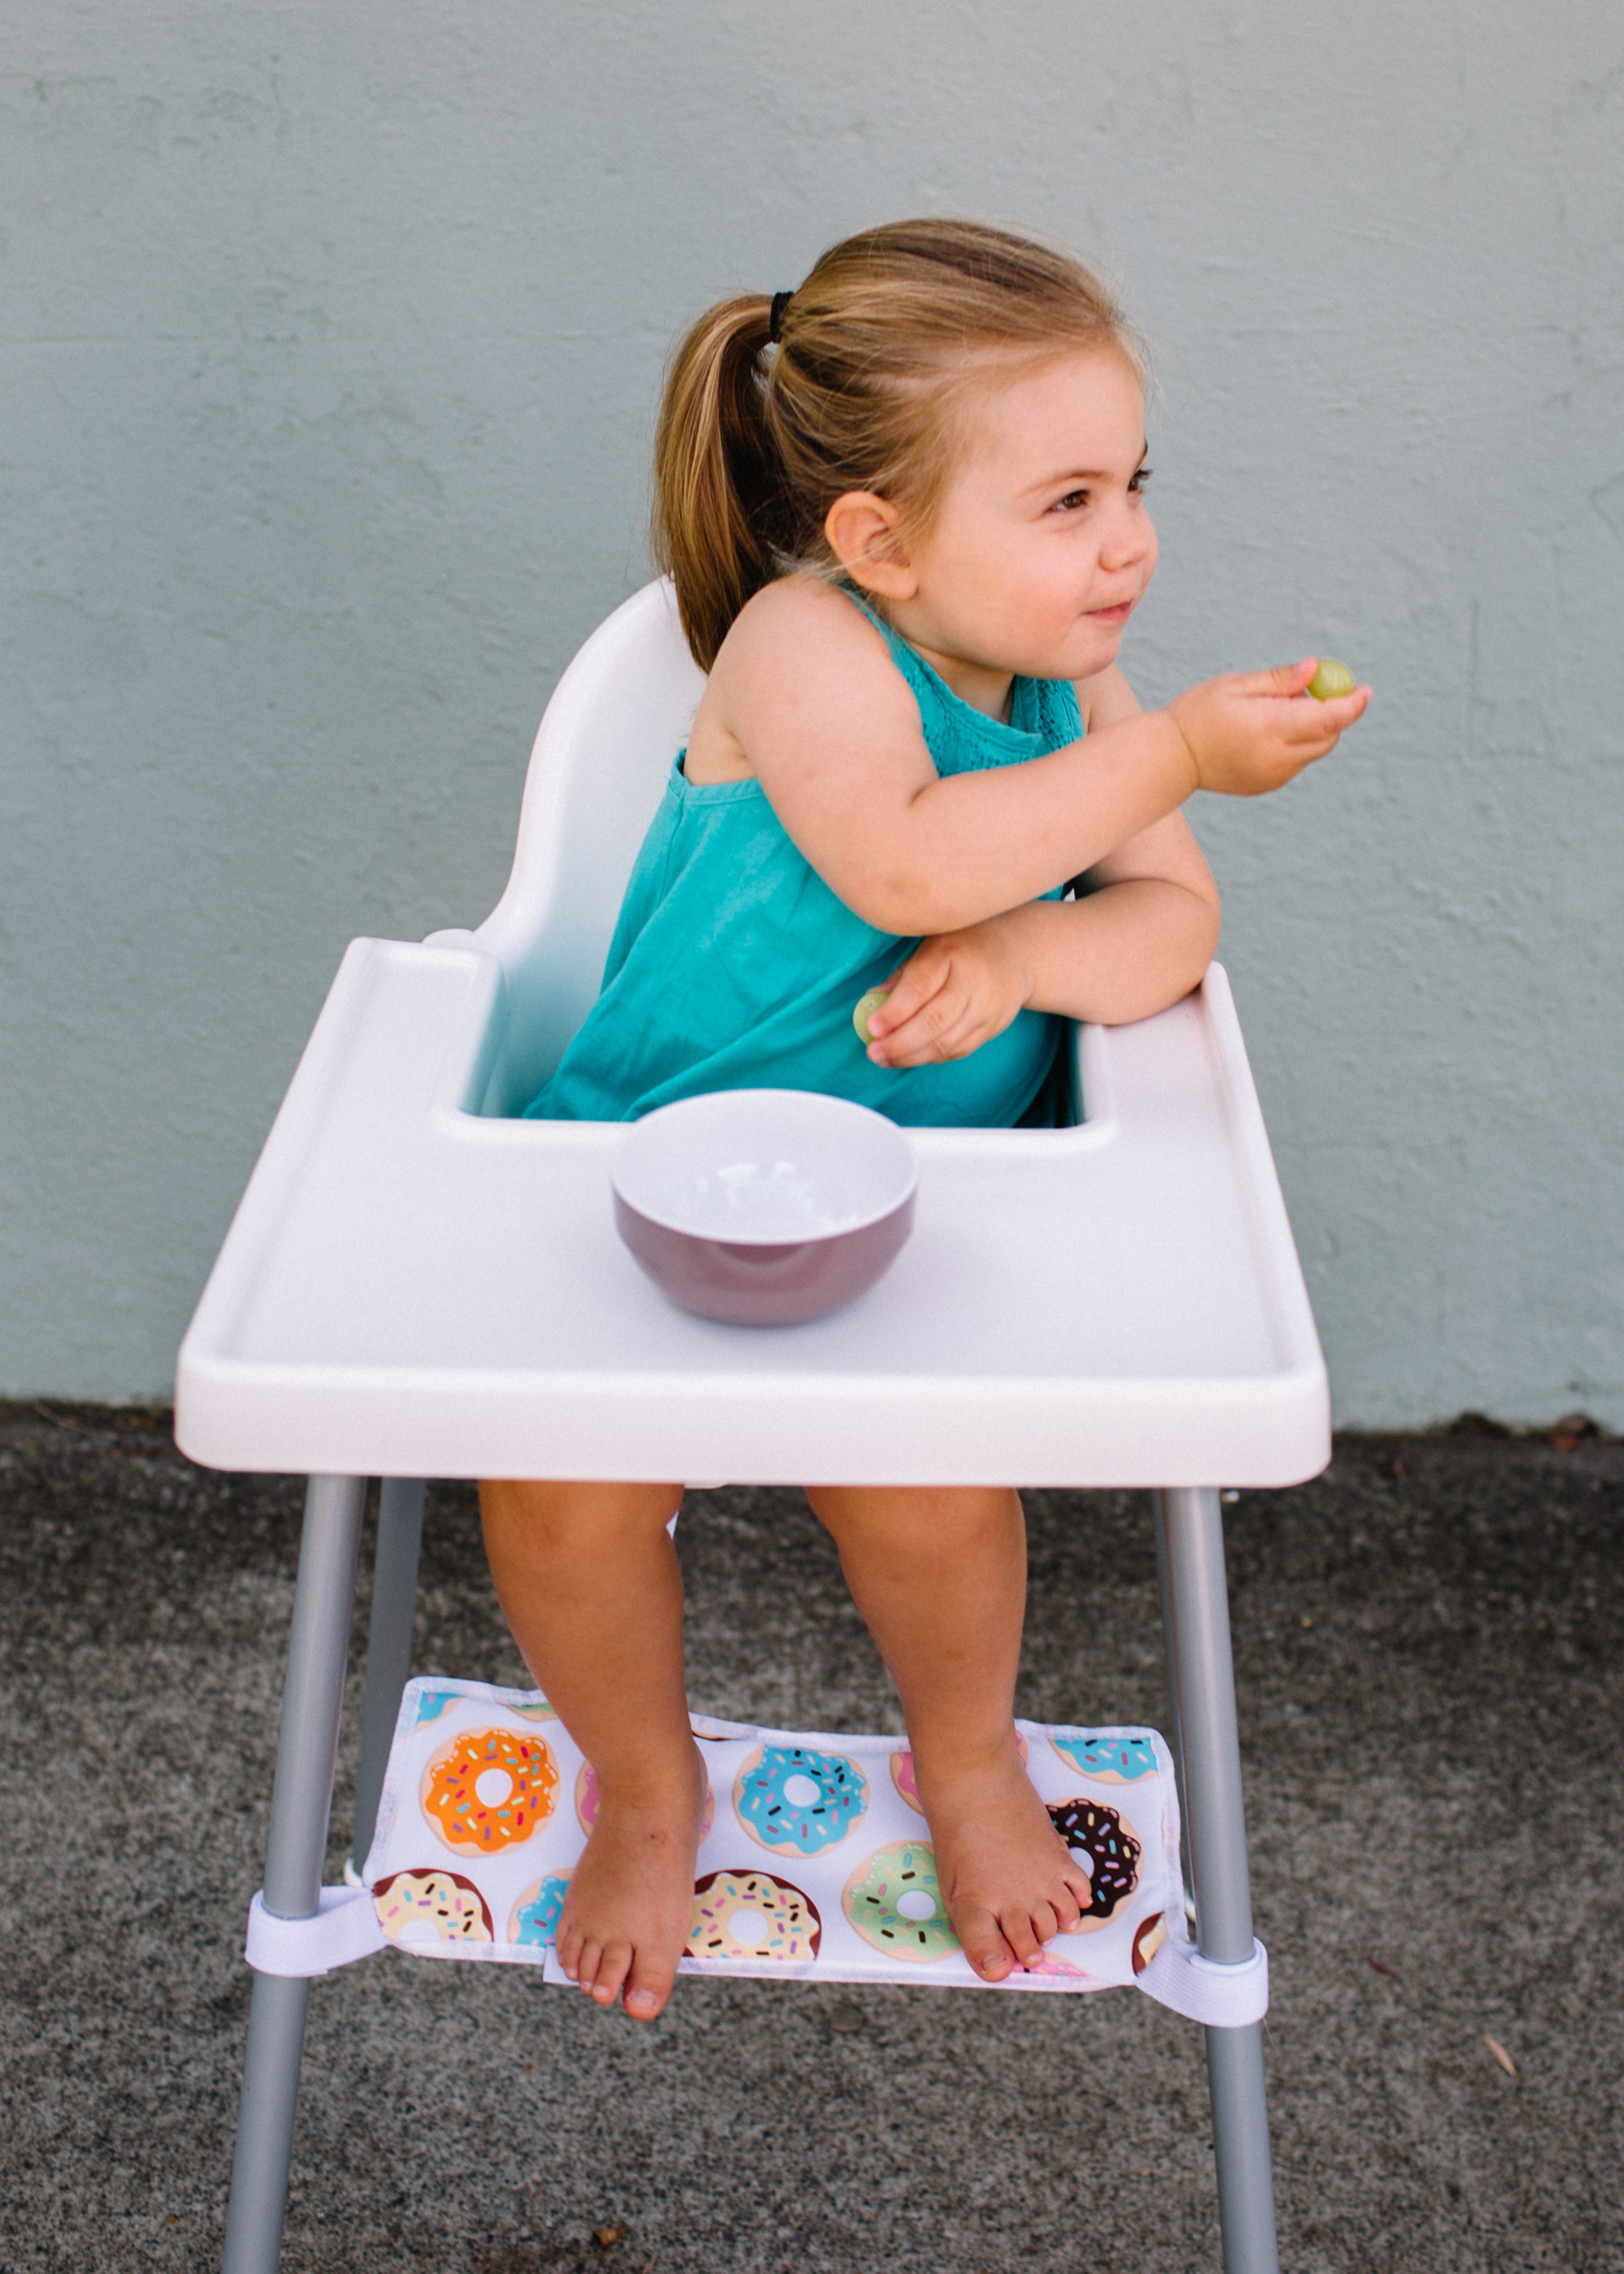 Why Your Baby's High Chair Needs a Footrest — Baby-Led Weaning Made Easy